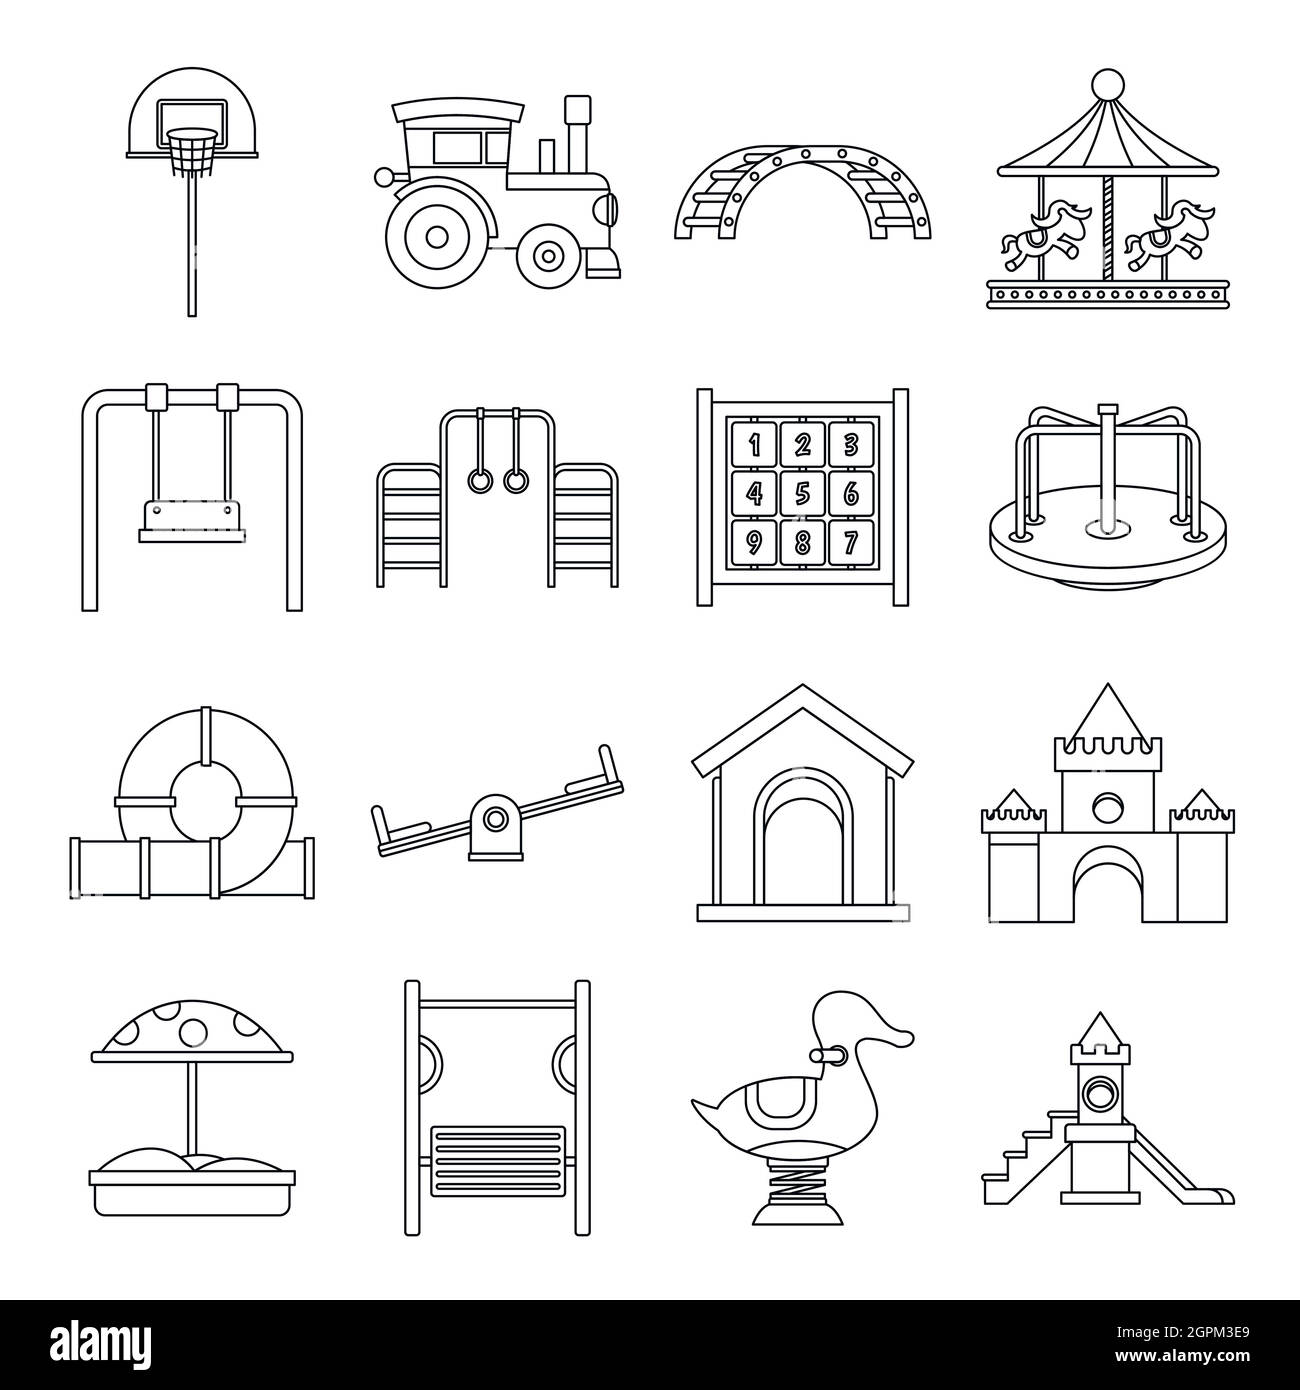 Playground icons set, outline style Stock Vector